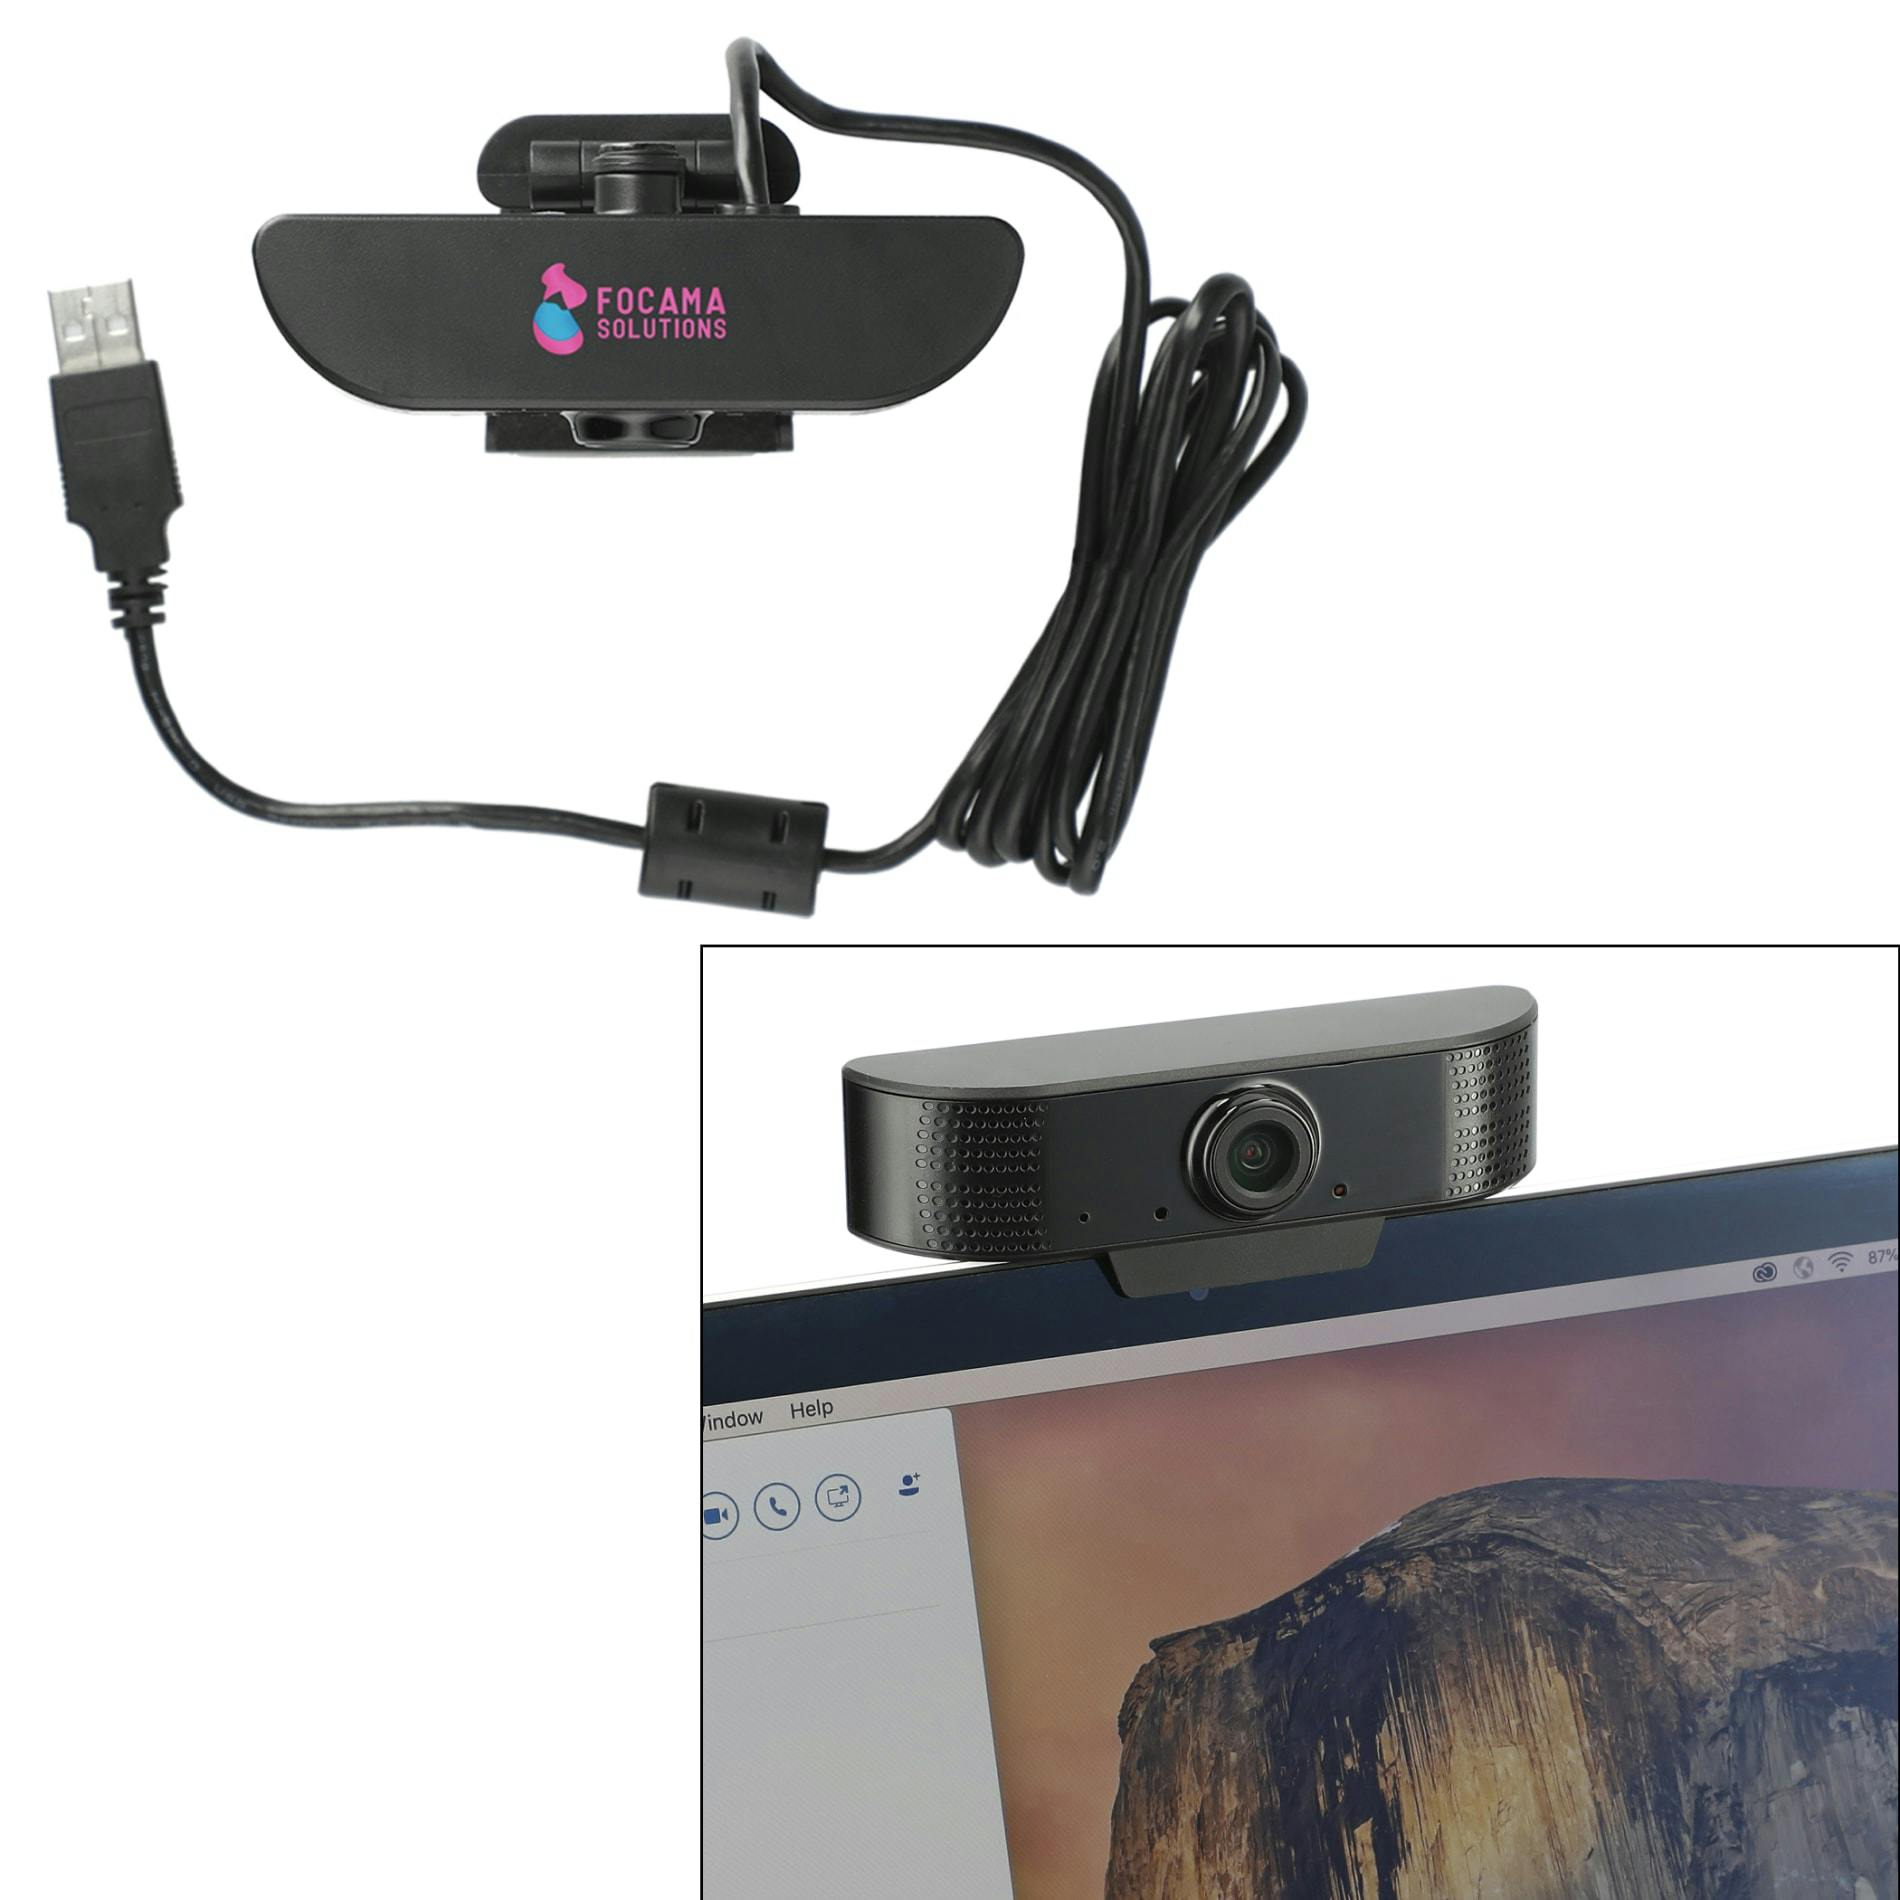 1080P HD Webcam with Microphone - additional Image 1